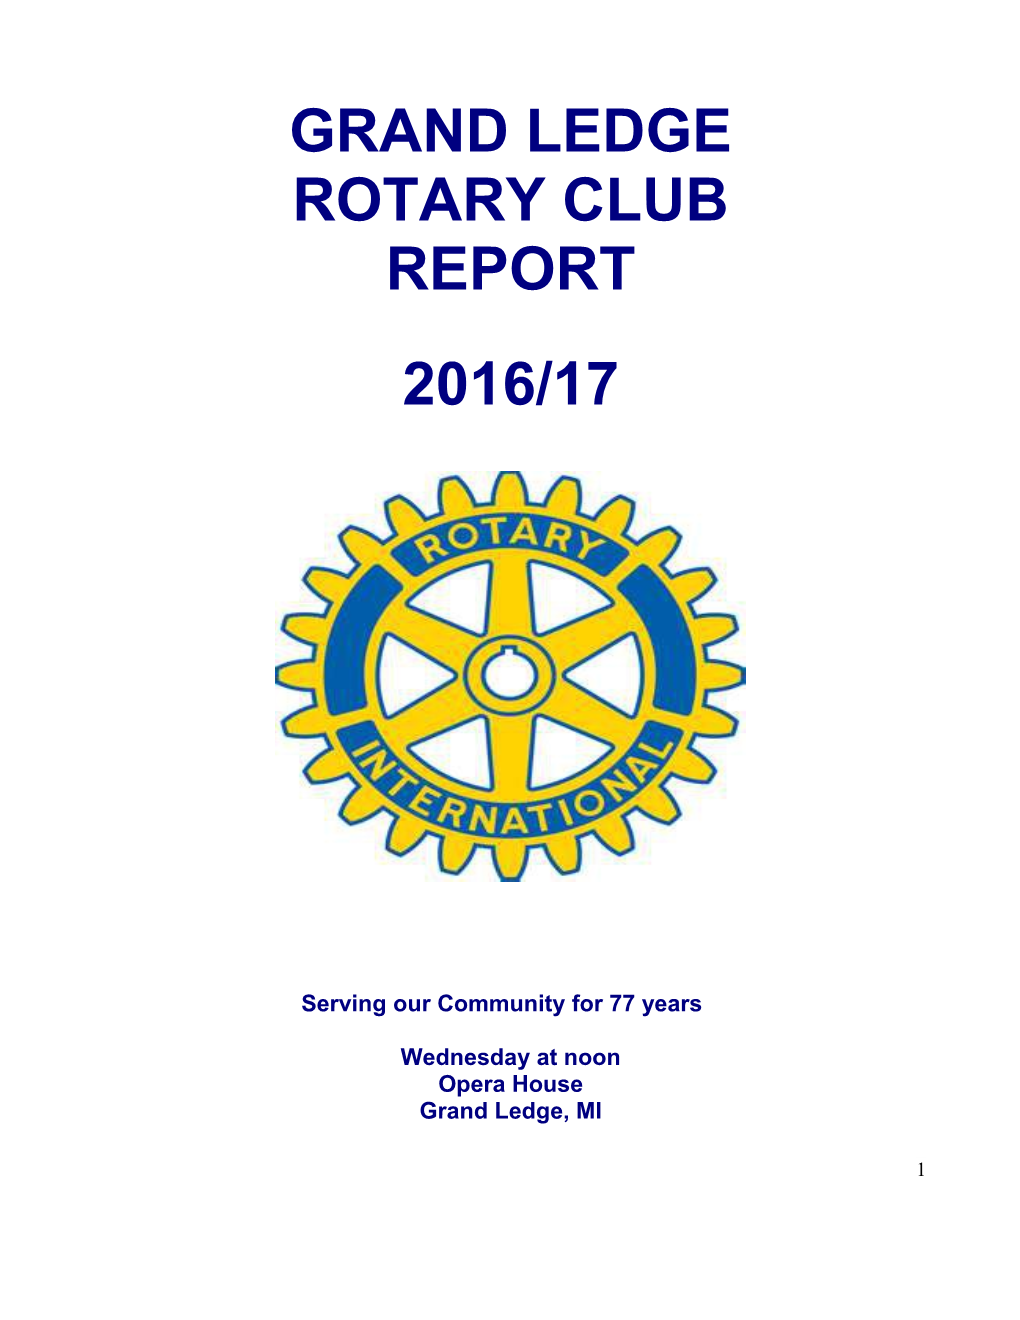 The Objects of Rotary